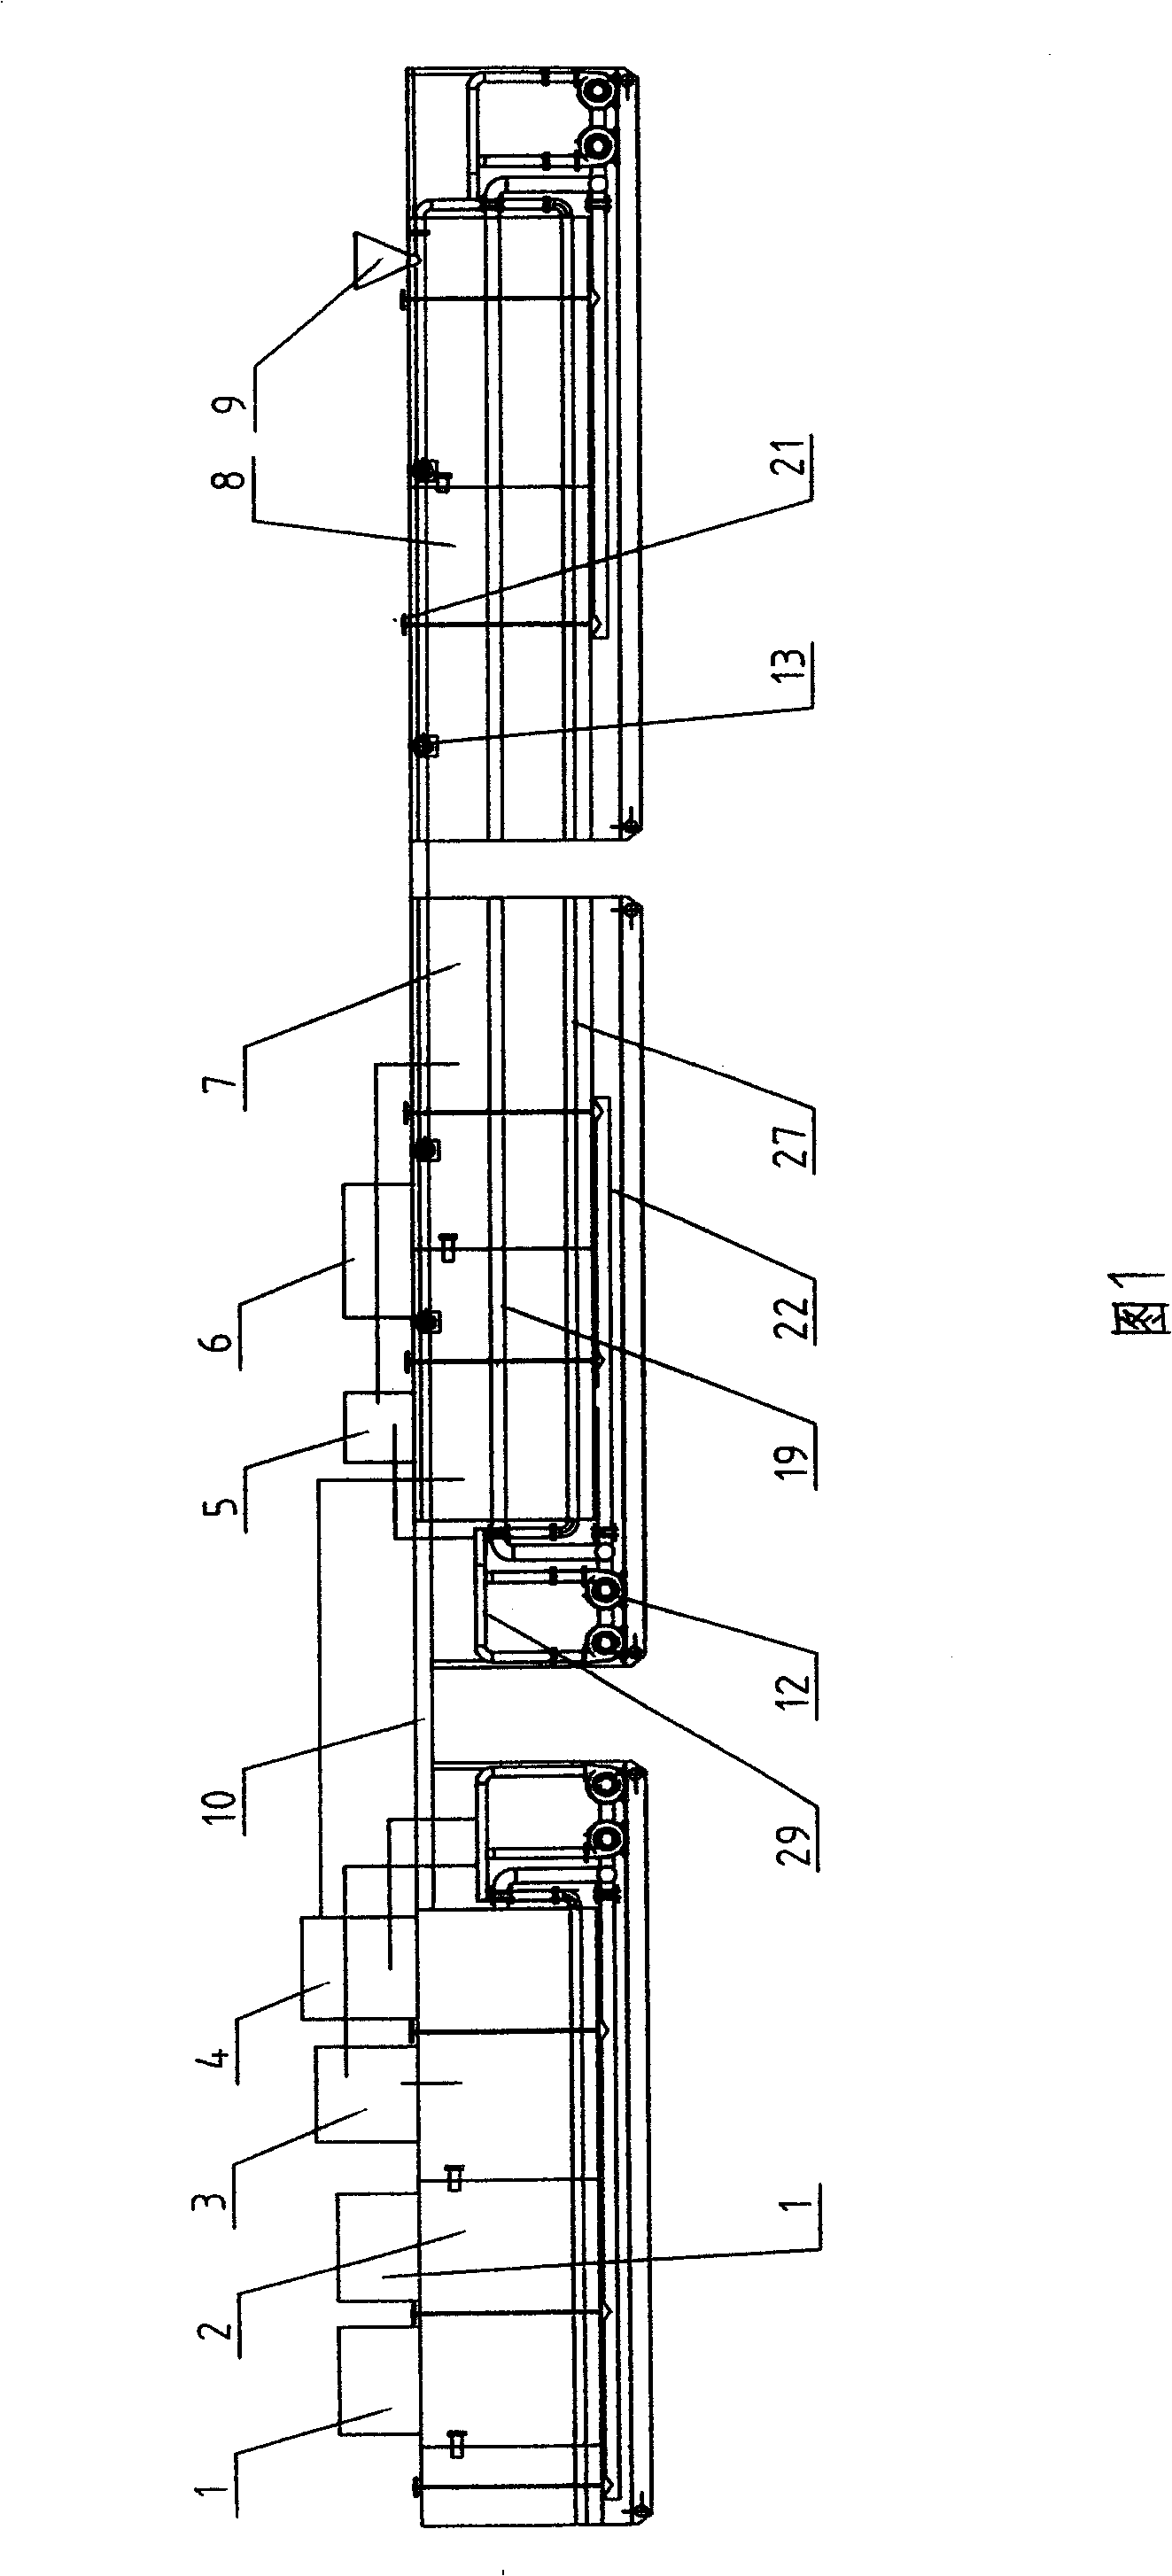 Drilling fluid cleaning system device